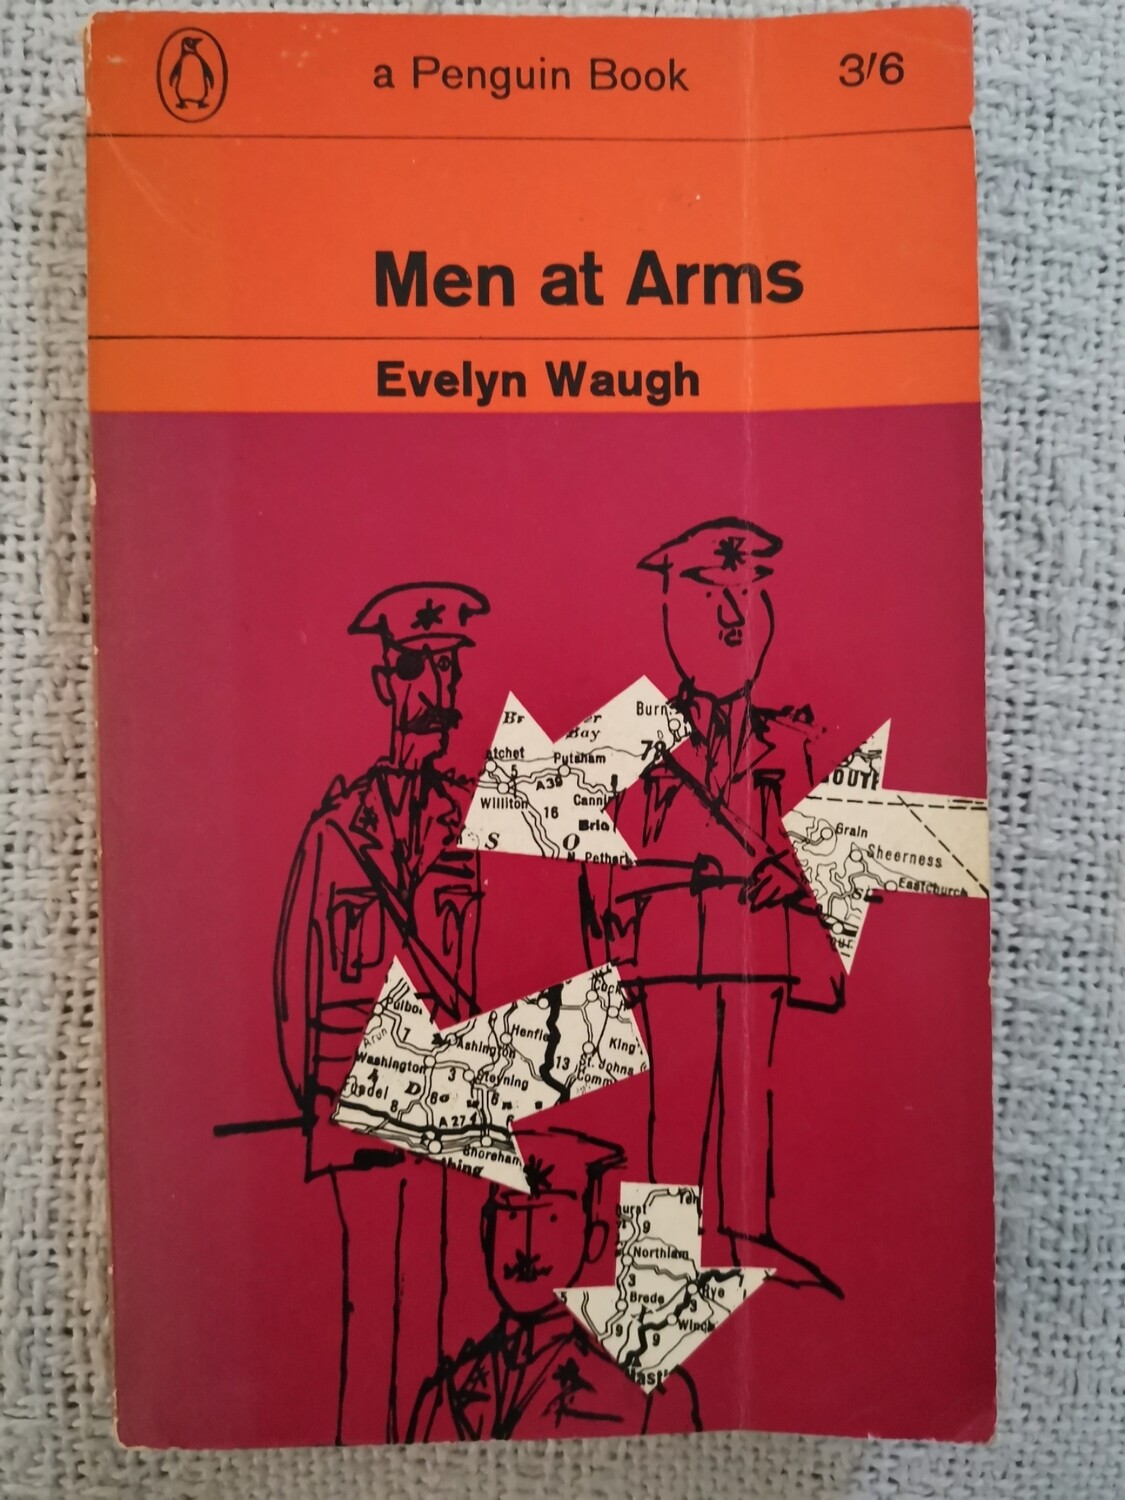 Men at arms, Evelyn Waugh